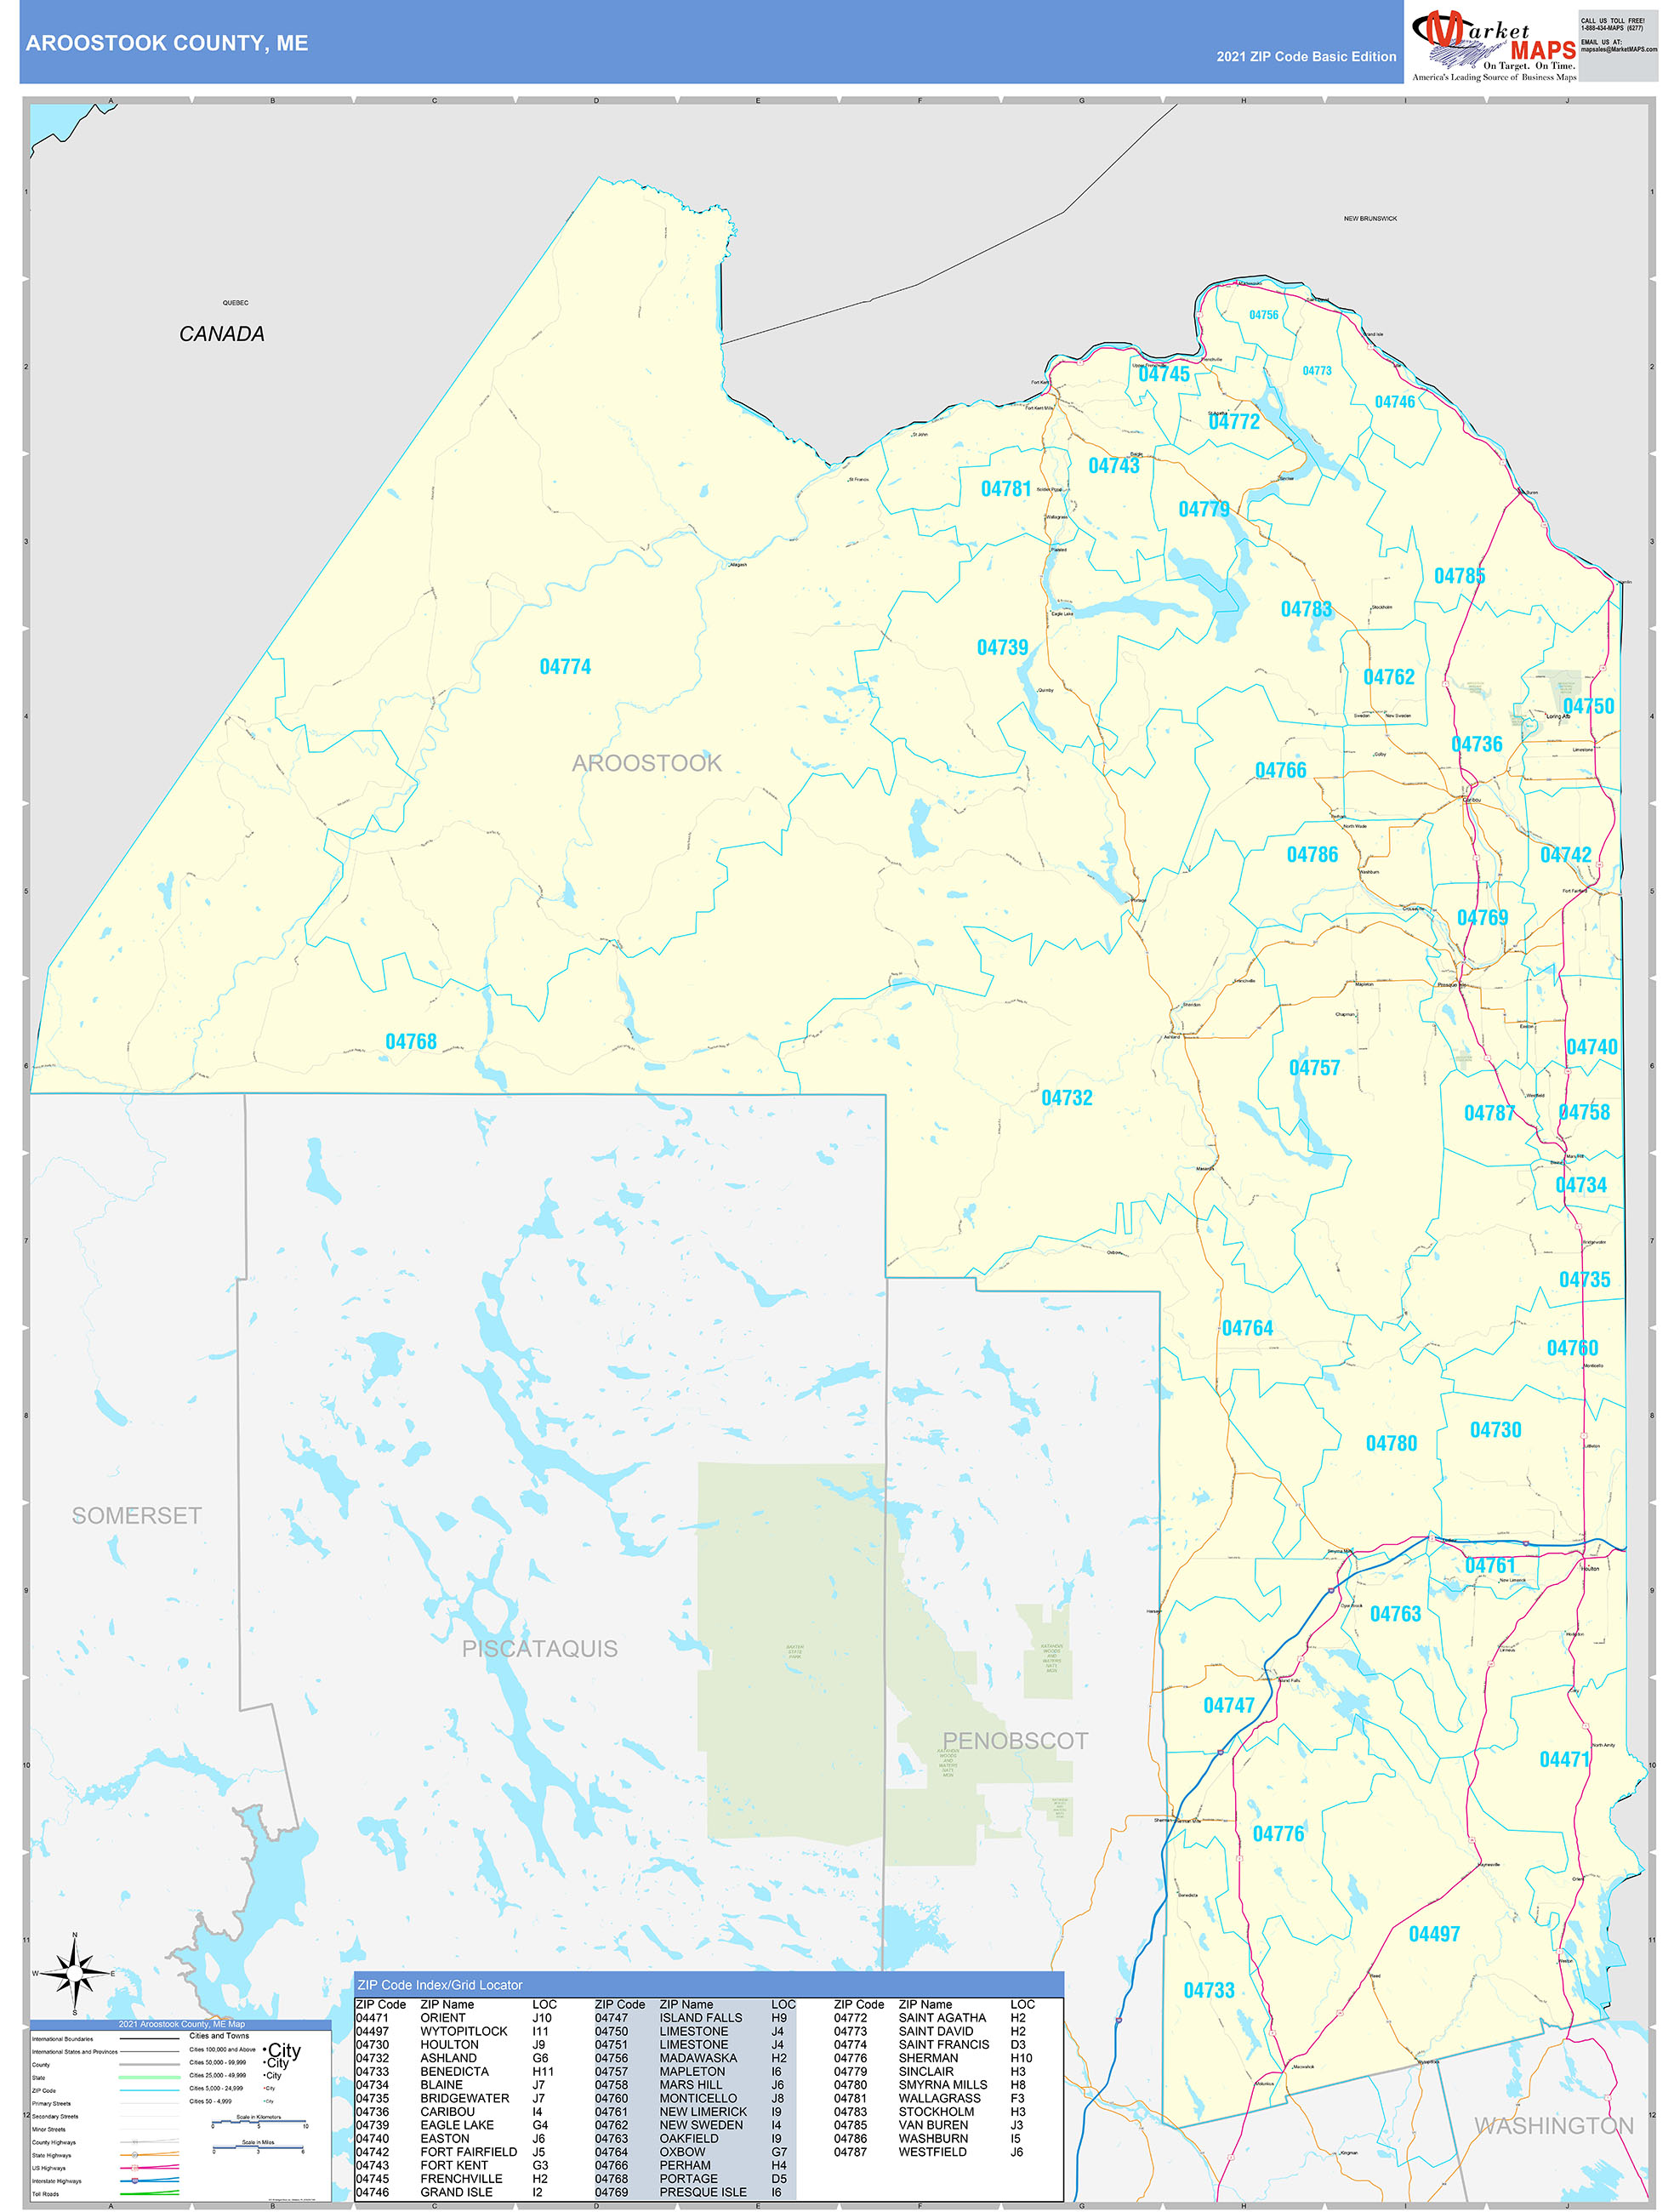 Aroostook County, ME Zip Code Wall Map Basic Style by MarketMAPS